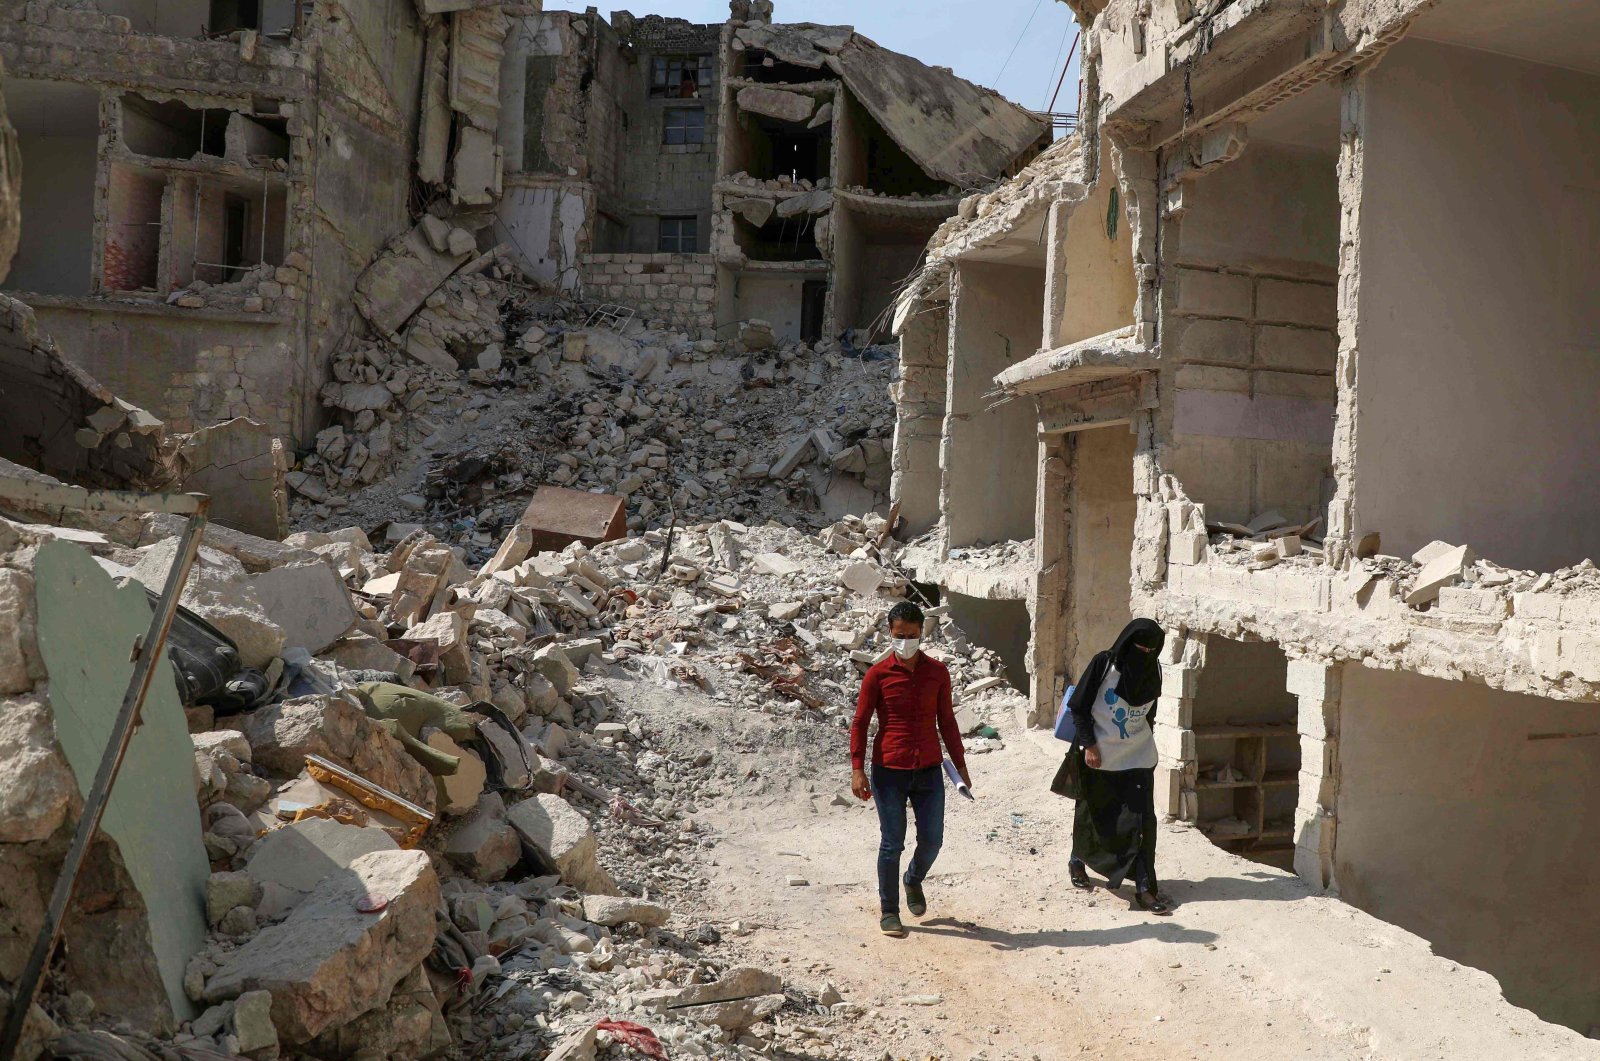 Two Syrian medics go door to door in the ravaged town of Ariha in the opposition-held northwestern Idlib province, Syria, Oct. 10, 2020. (AFP Photo)